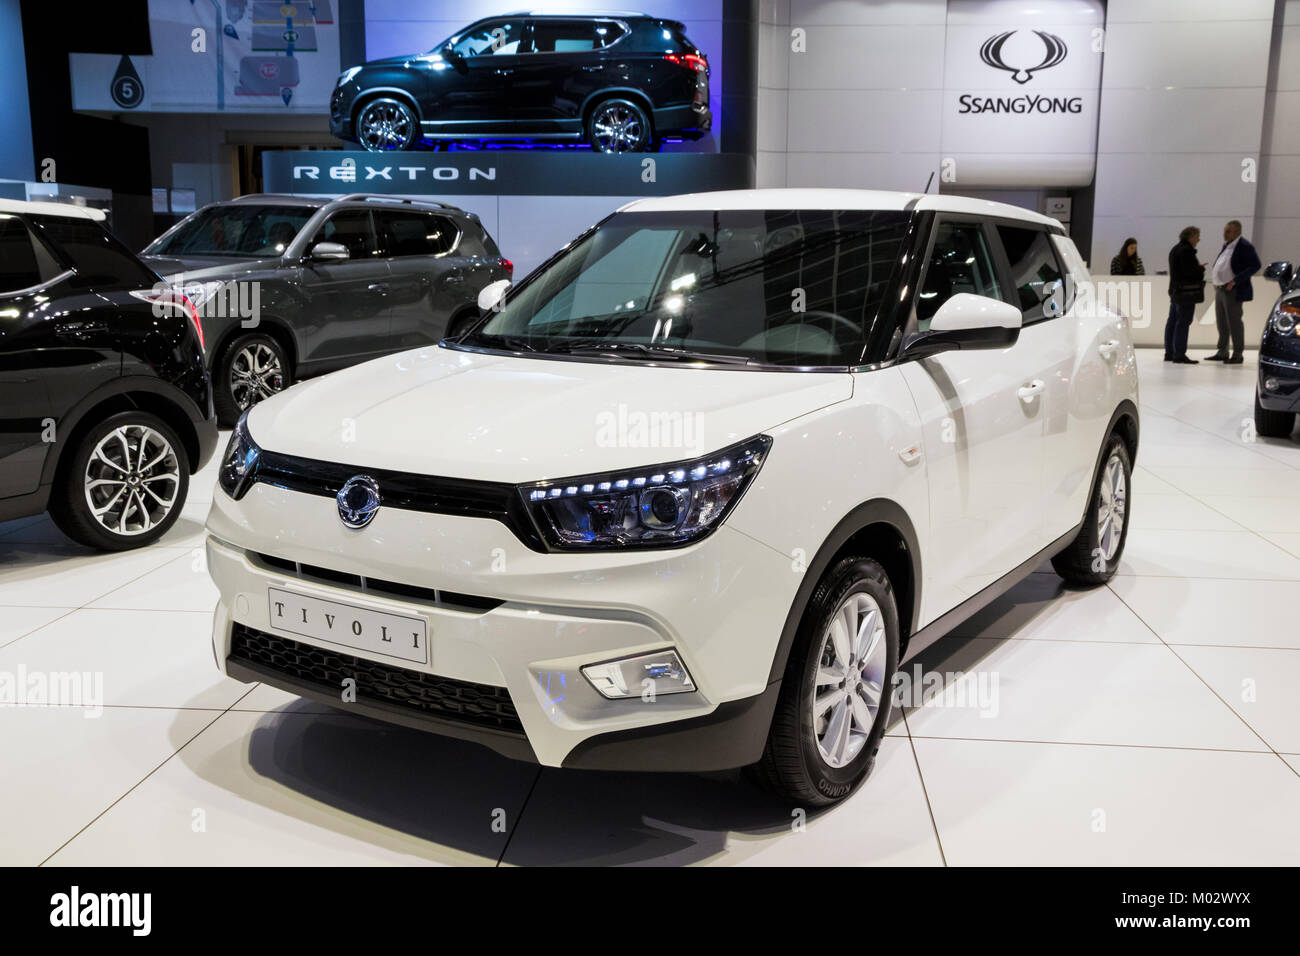 BRUSSELS - JAN 10, 2018: SsangYong Tivoli mini-SUV car showcased at the Brussels Motor Show. Stock Photo